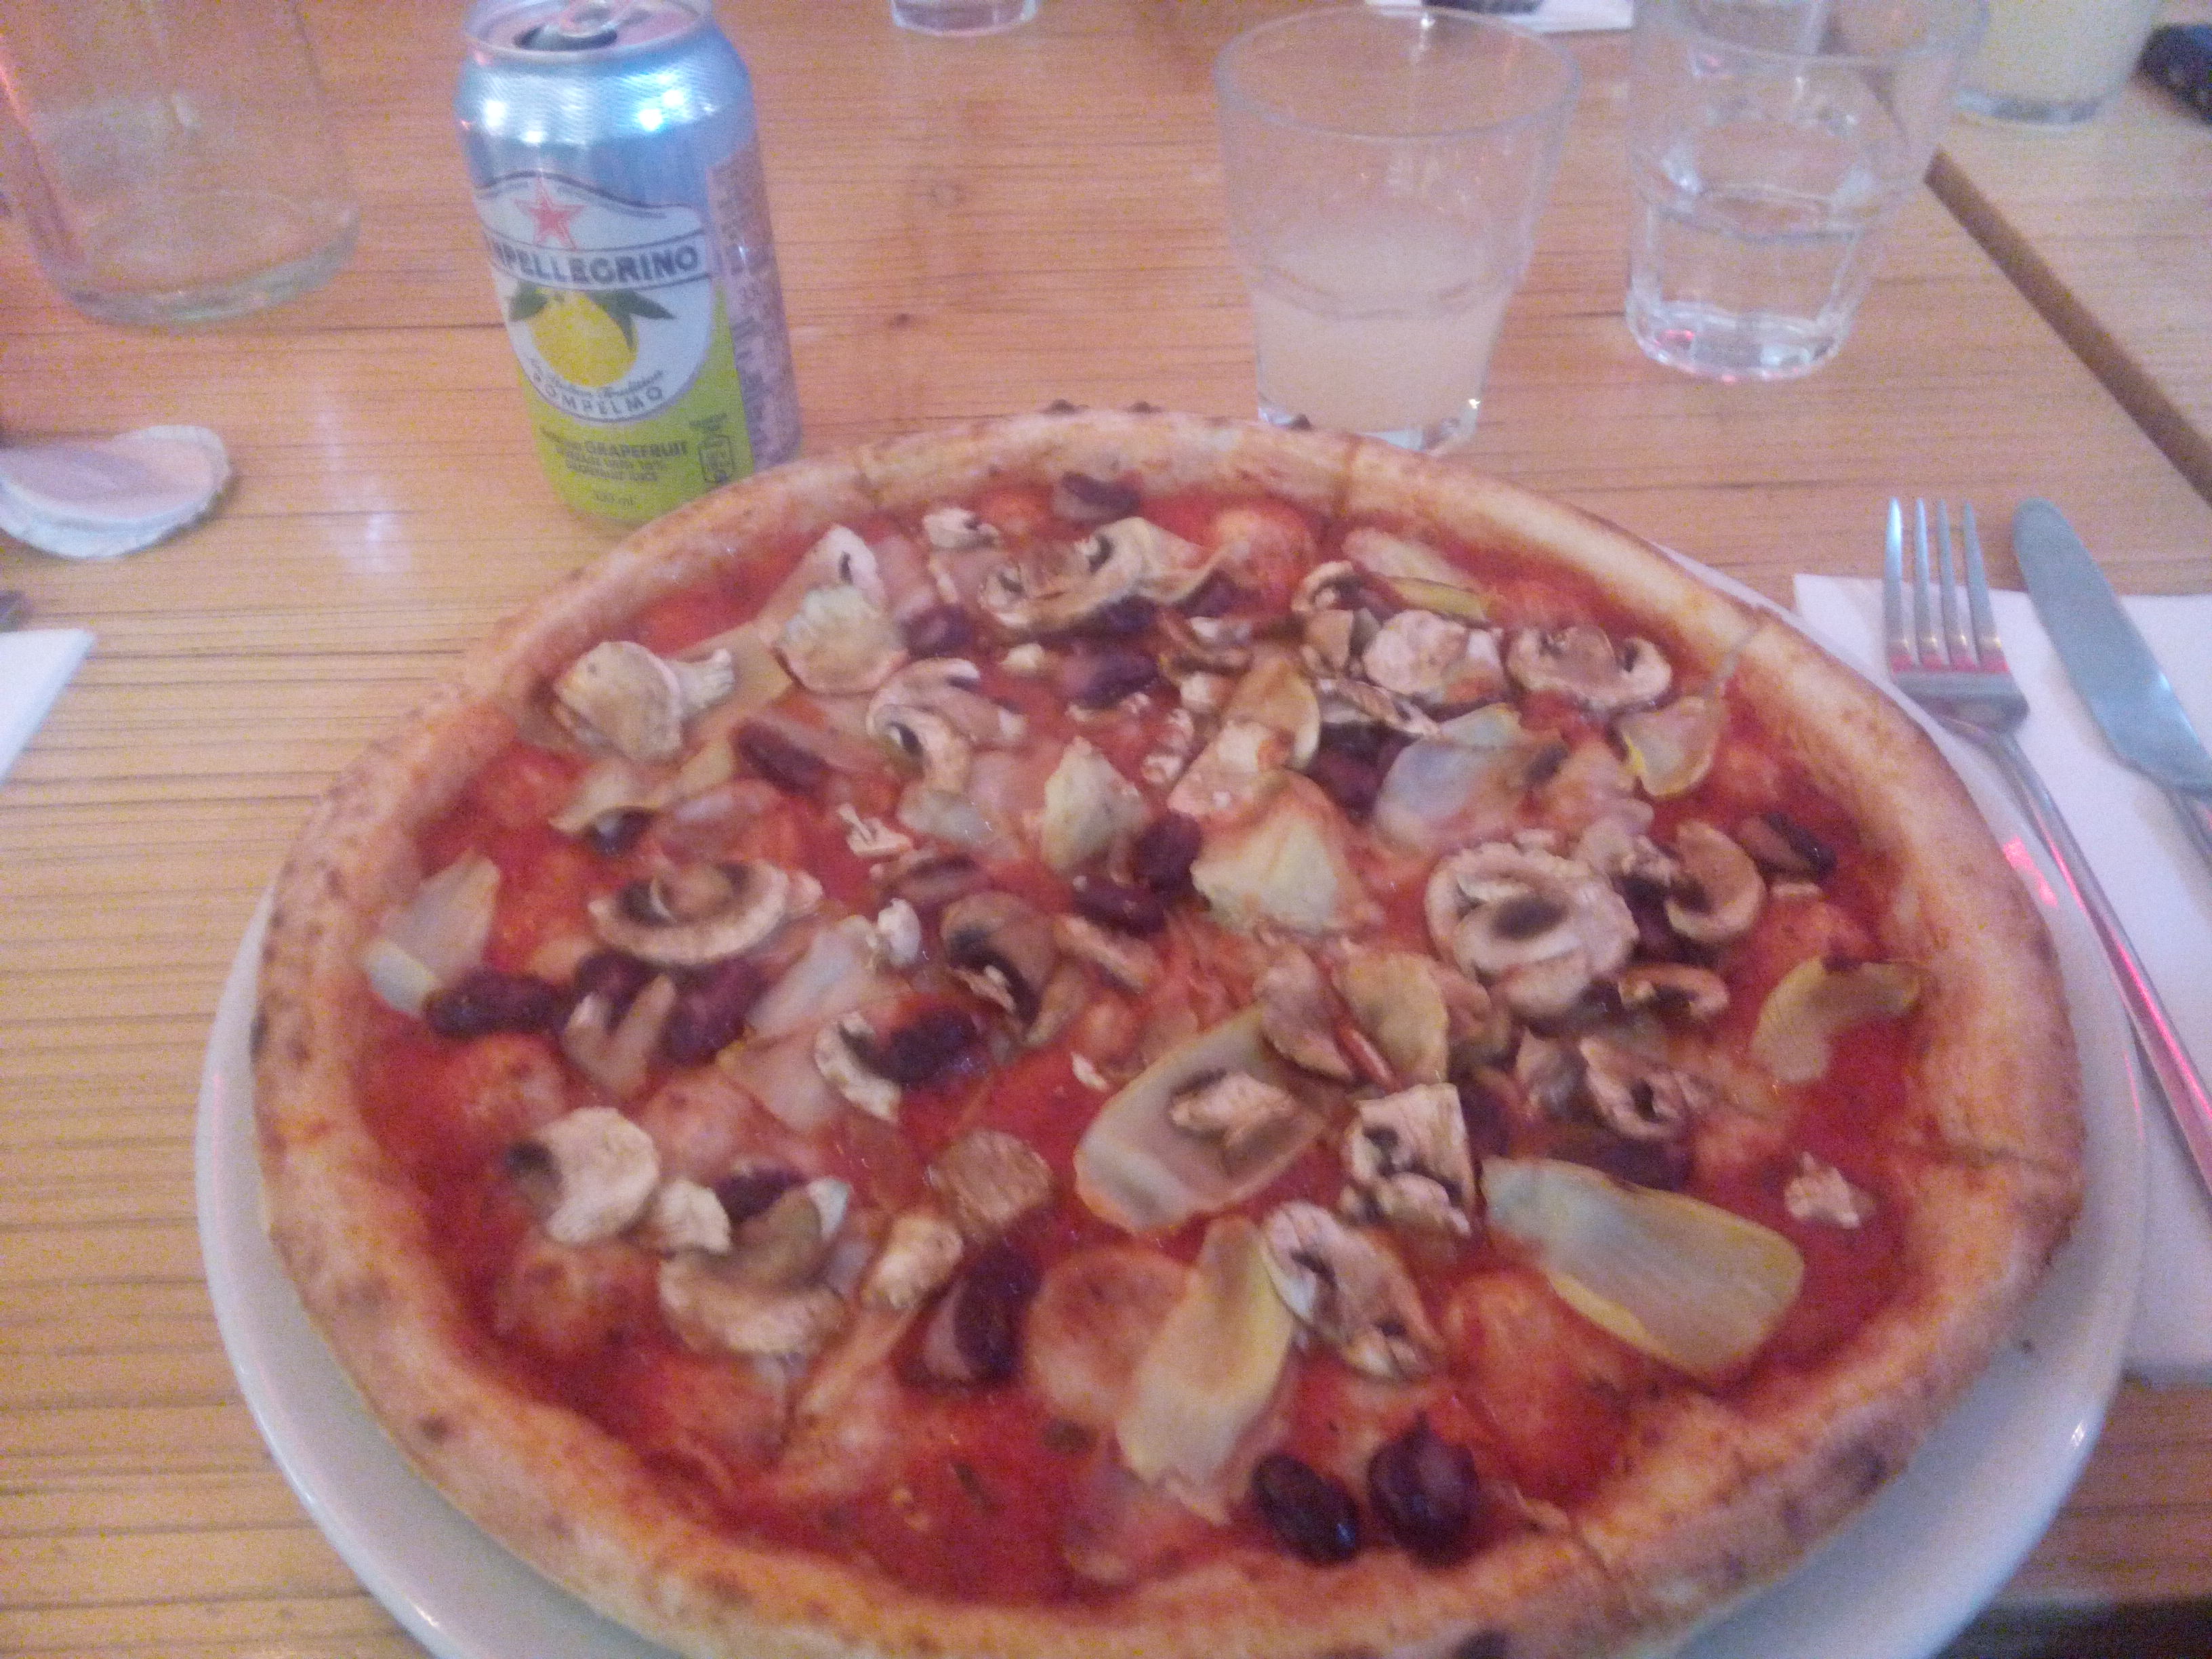 A pizza with tomato sauce, kidney beans, artichoke and mushrooms (but no cheese)